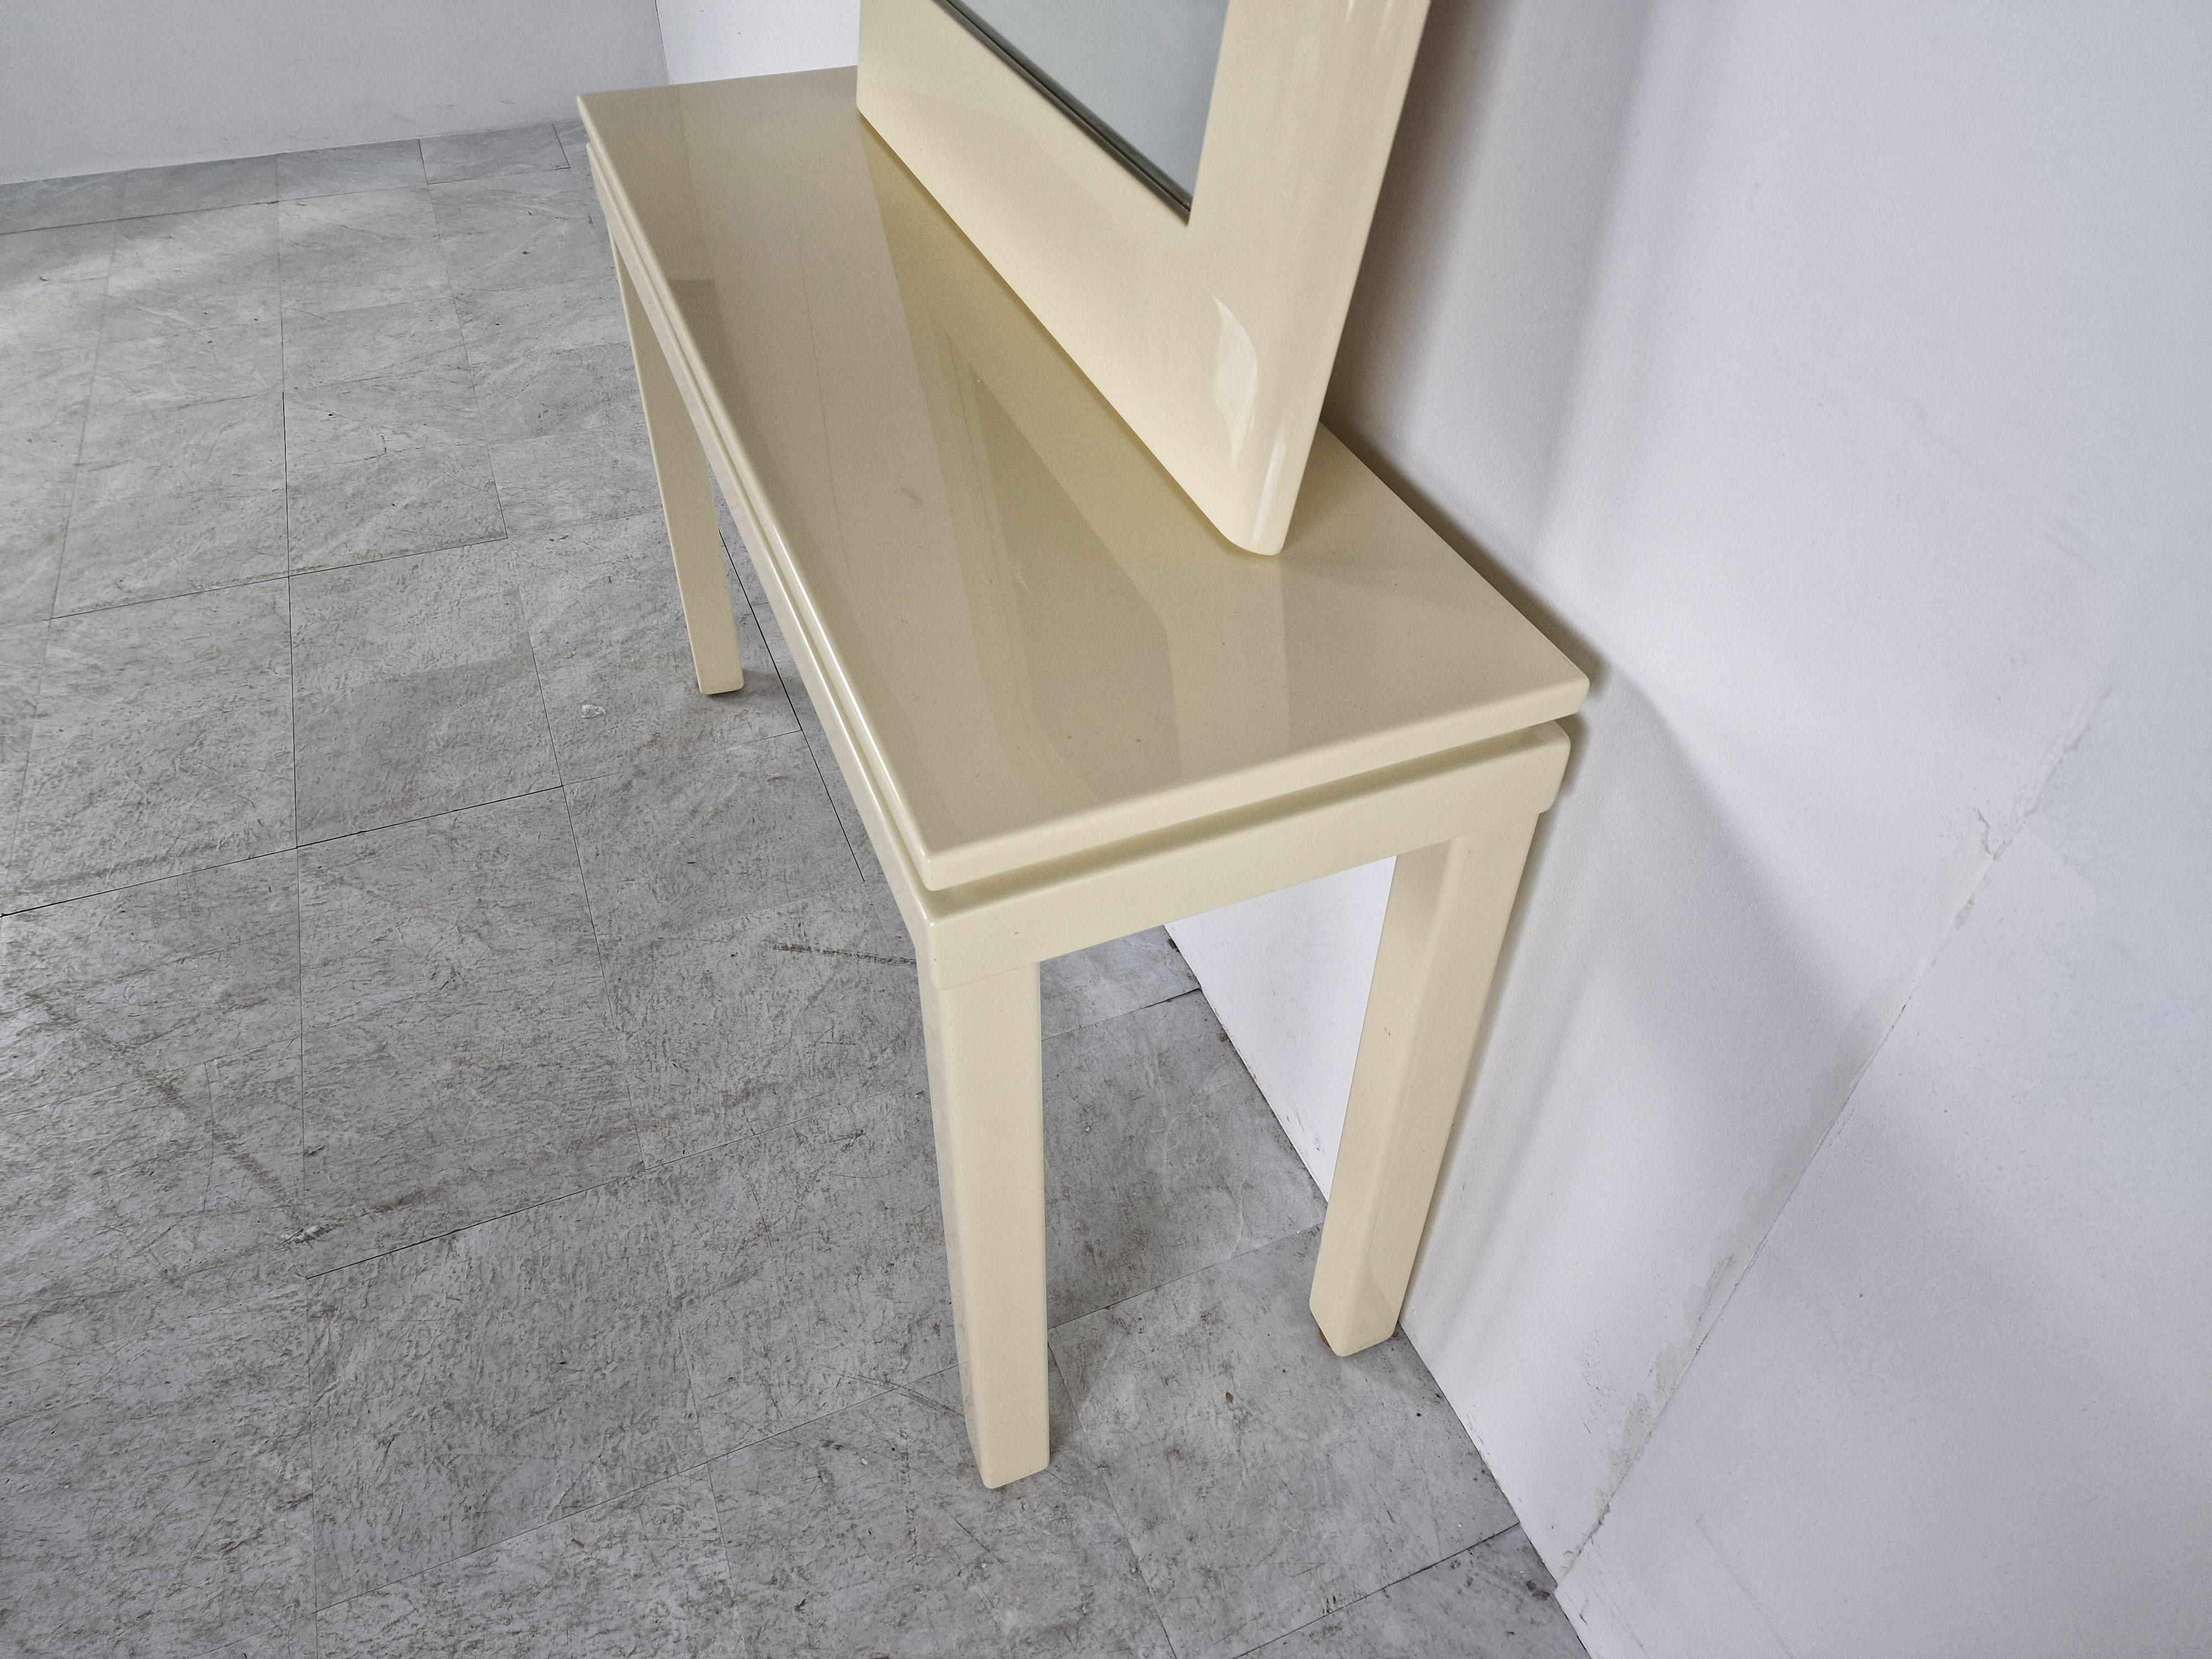 Vintage beige lacquer console table with matching mirror.

In the style of Jean Claude Mahey.

Probably by roche Bobois.

1980s - France

Good overall condition witht age related wear.

Dimensions:
Height: 70cm/27.55